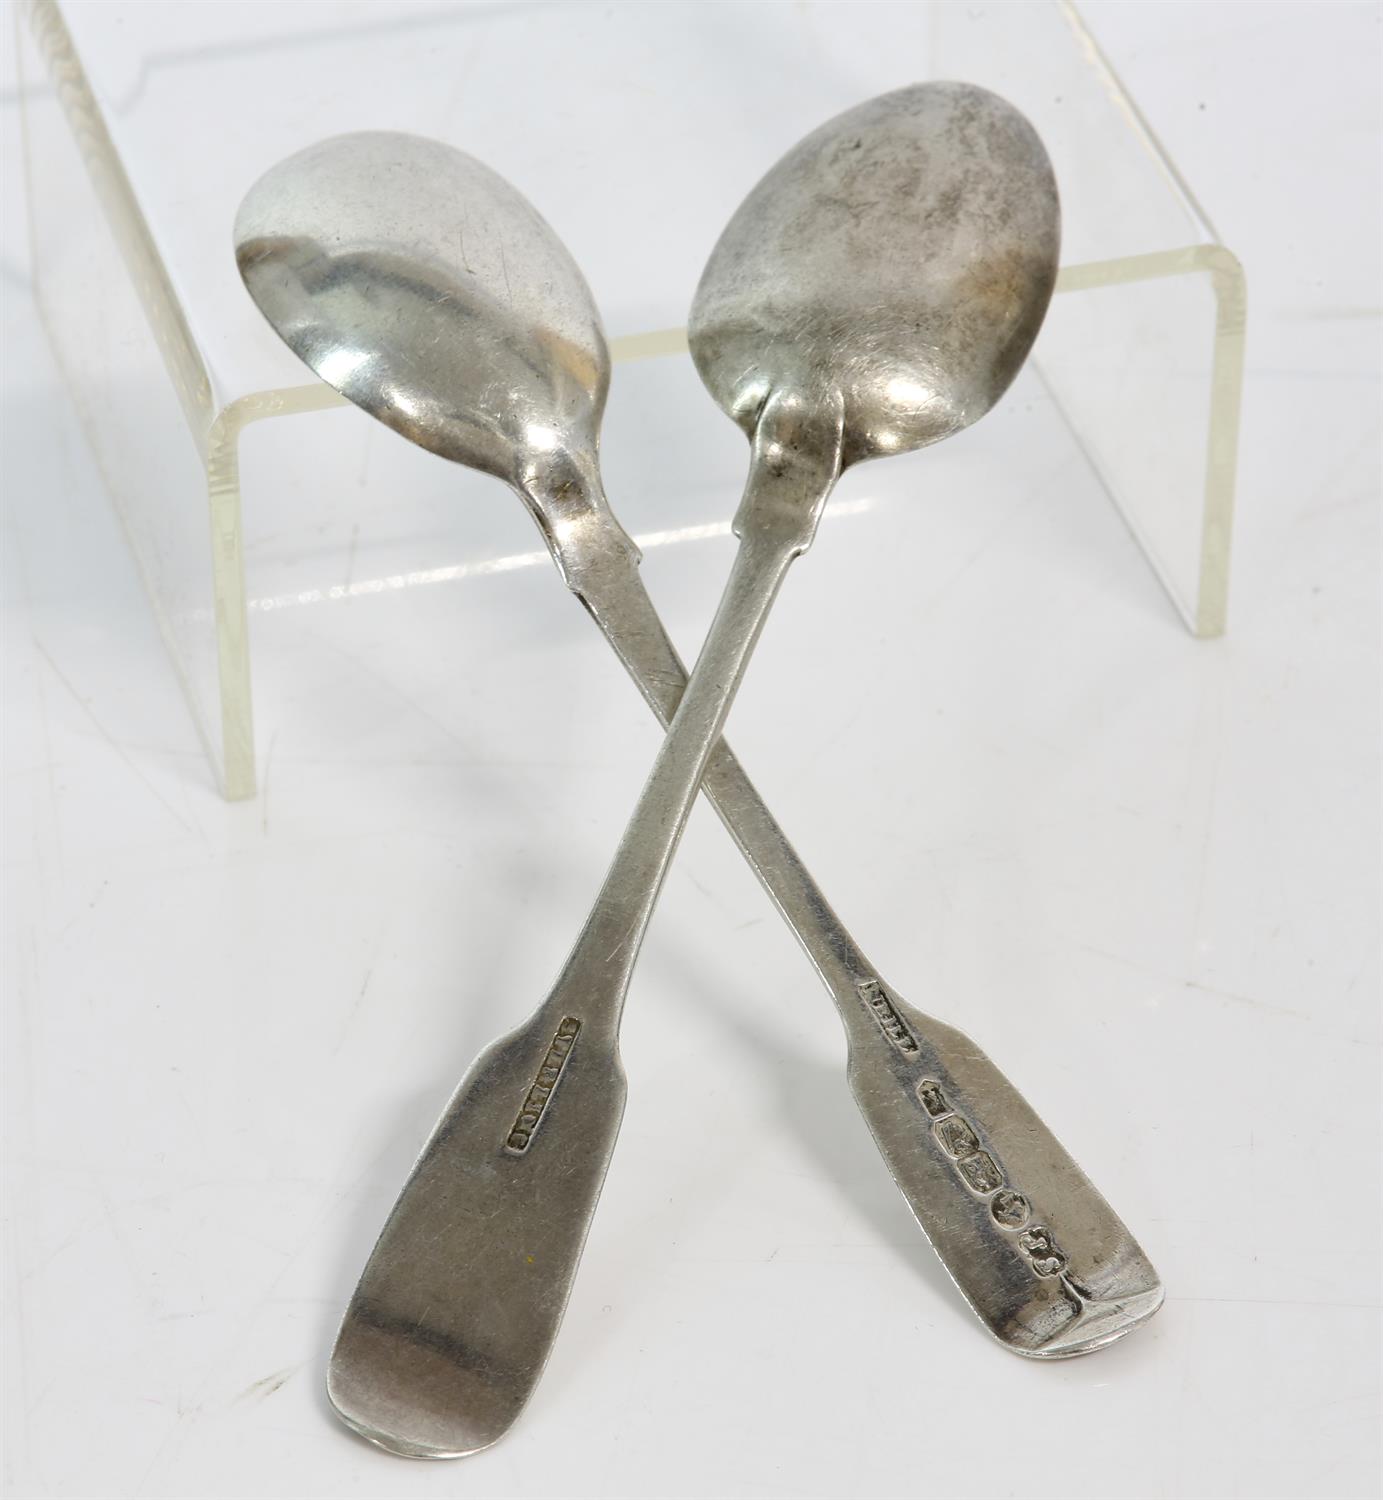 Irish provincial silver fiddle and shell spoon with Ramsey coat of arms marked sterling,